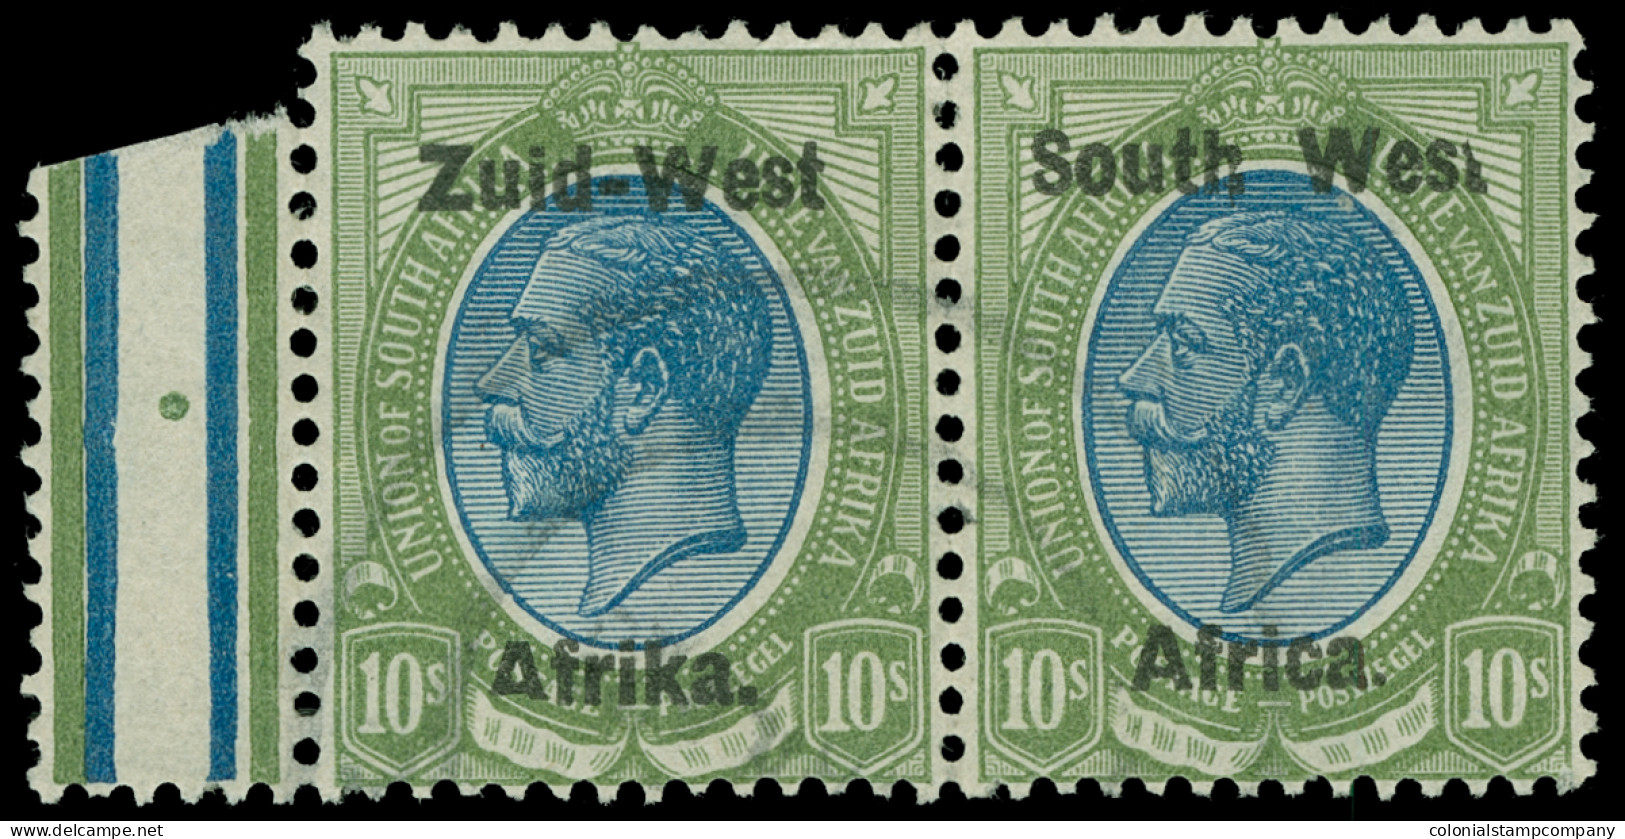 O South-West Africa - Lot No. 1554 - South West Africa (1923-1990)